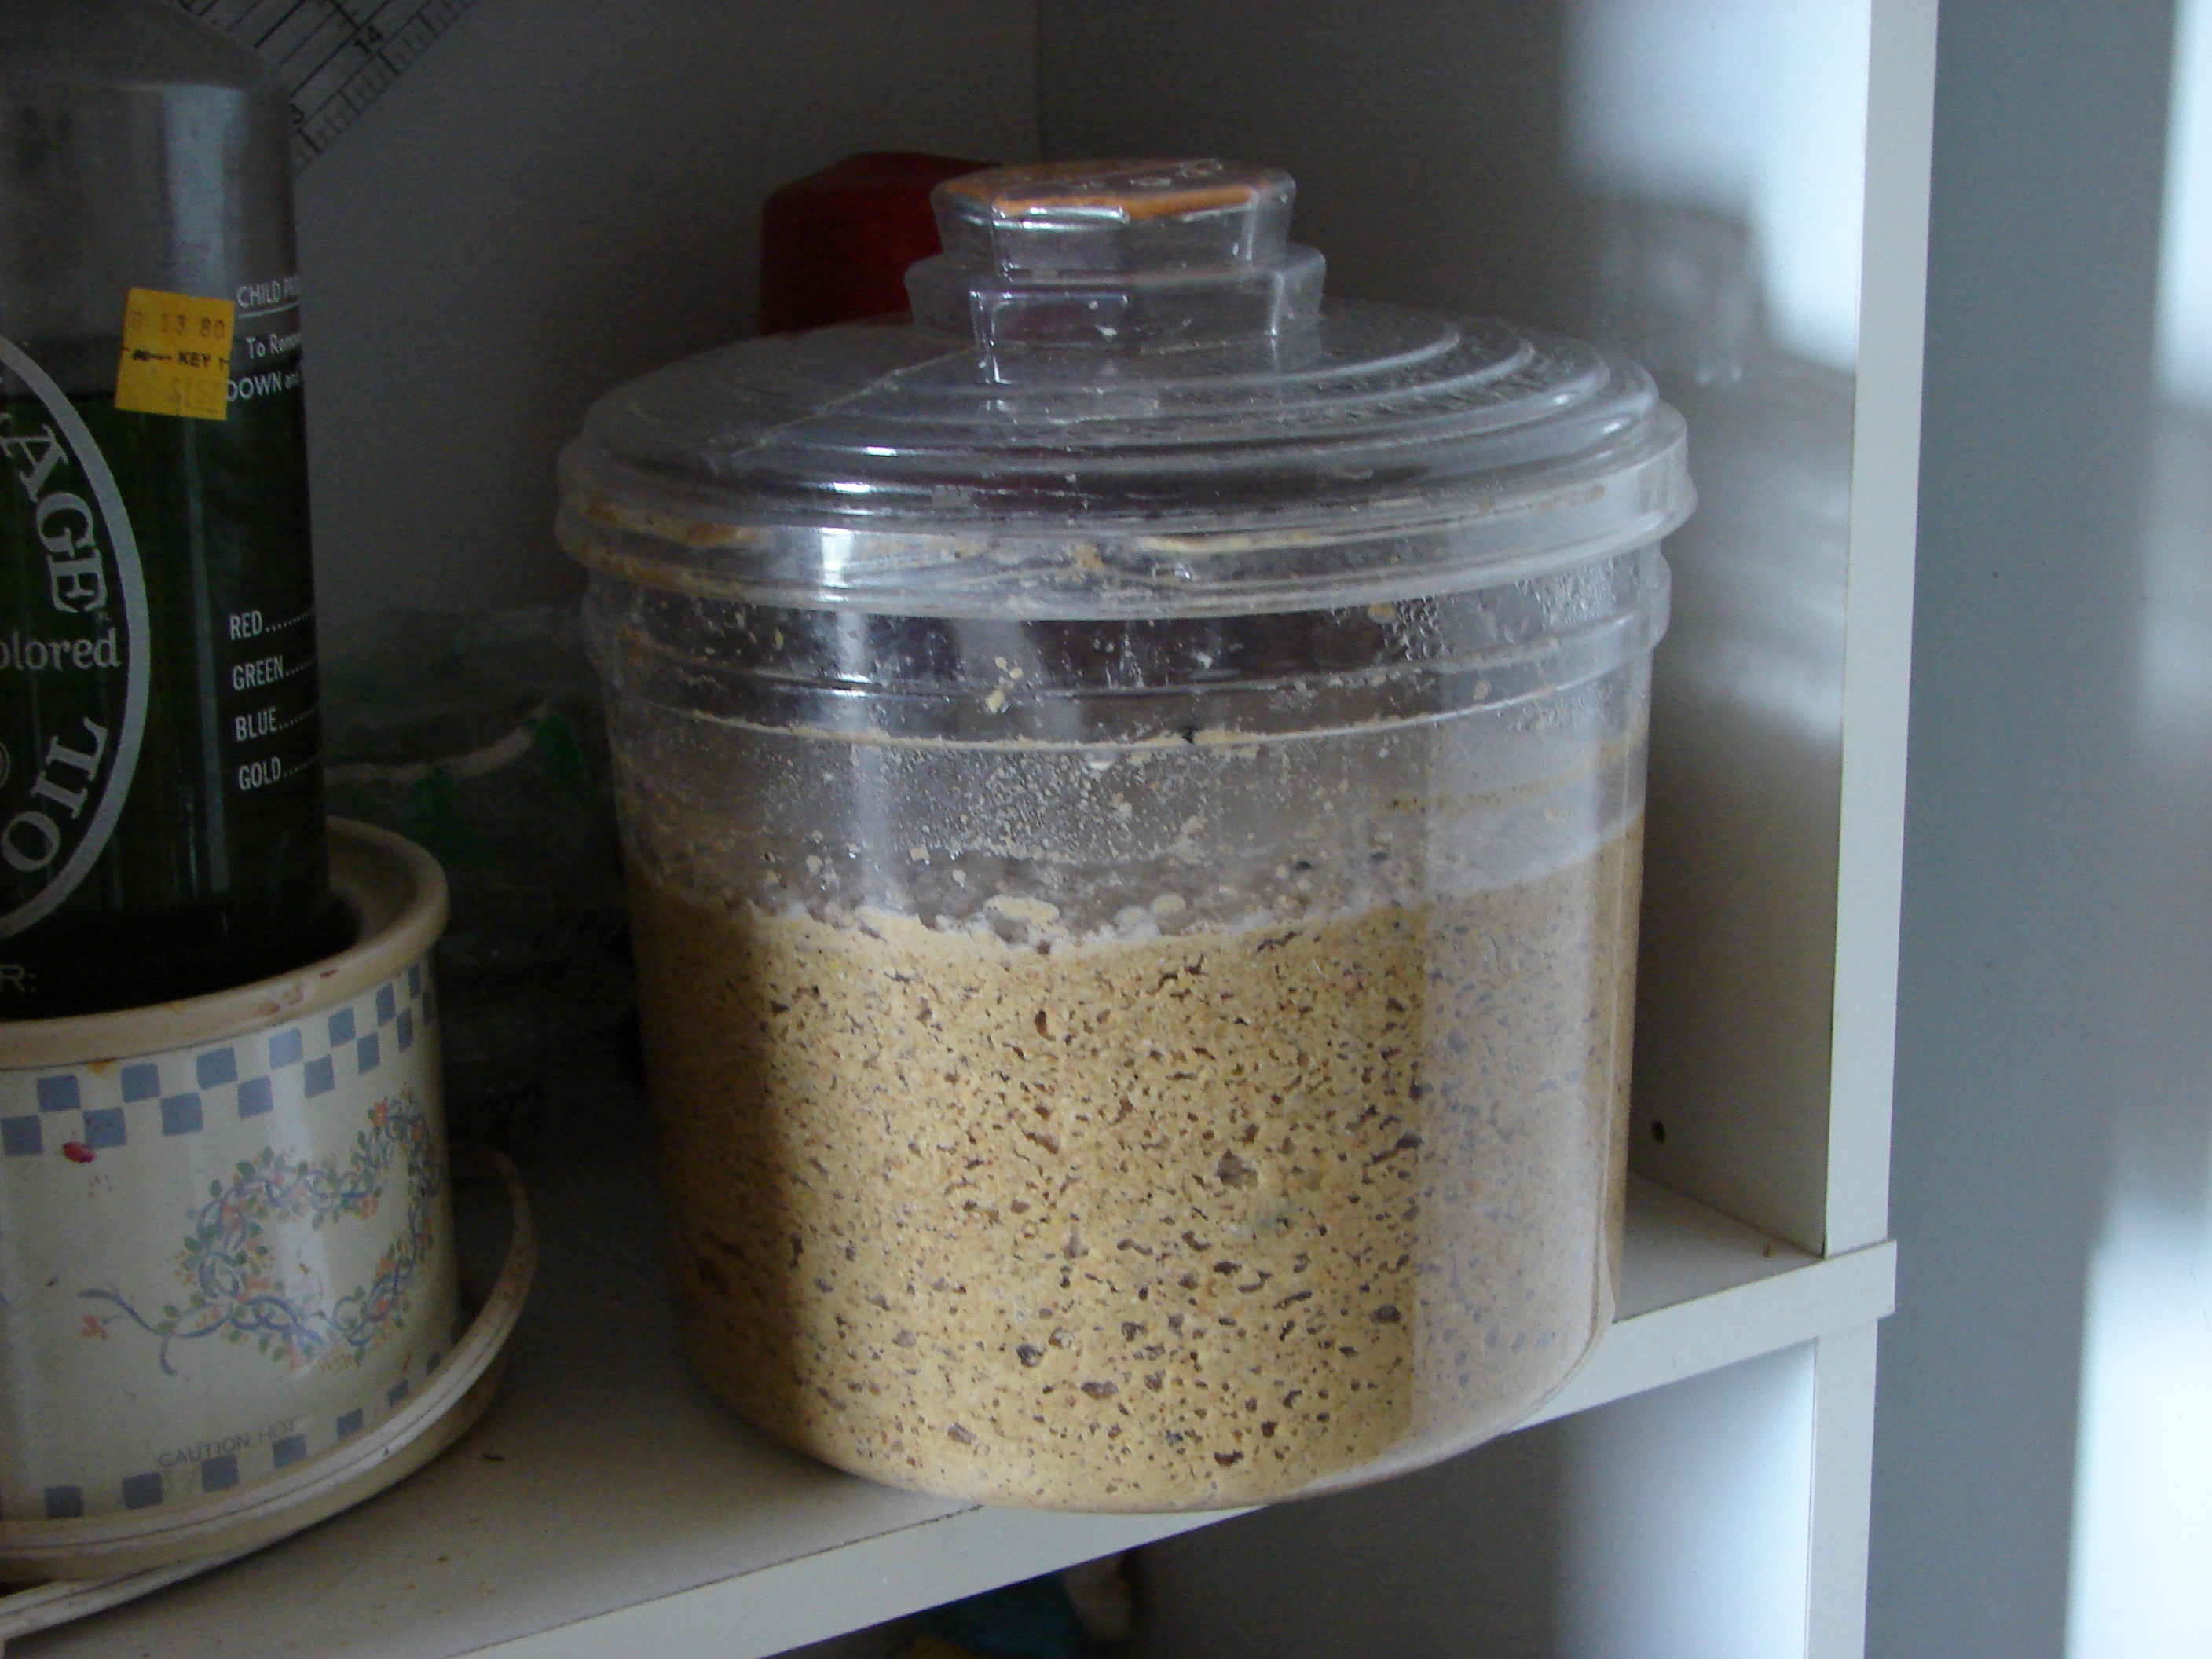 This is 2 to 3 days worth depending on how much they eat while free ranging.  Its fermented starter/grower crumbles.  I replace what i feed out every evening.  Instead of letting the container go nearly empty.  It is in the house because its a lot cooler only 90. That way the feed isn't over fermenting the way it would outside.